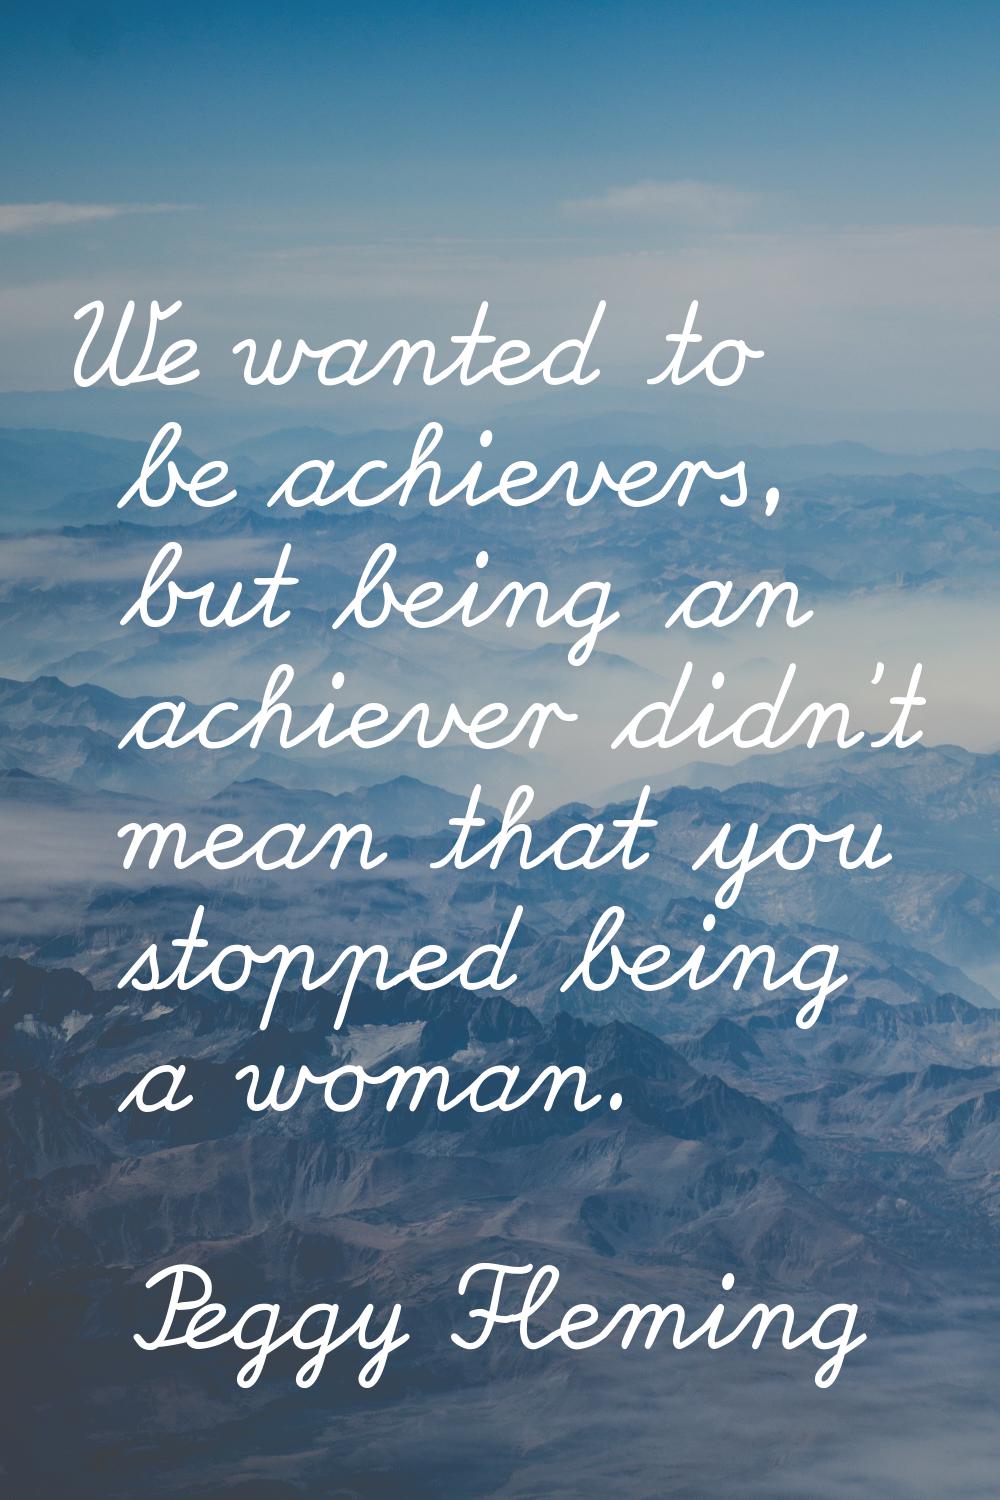 We wanted to be achievers, but being an achiever didn't mean that you stopped being a woman.